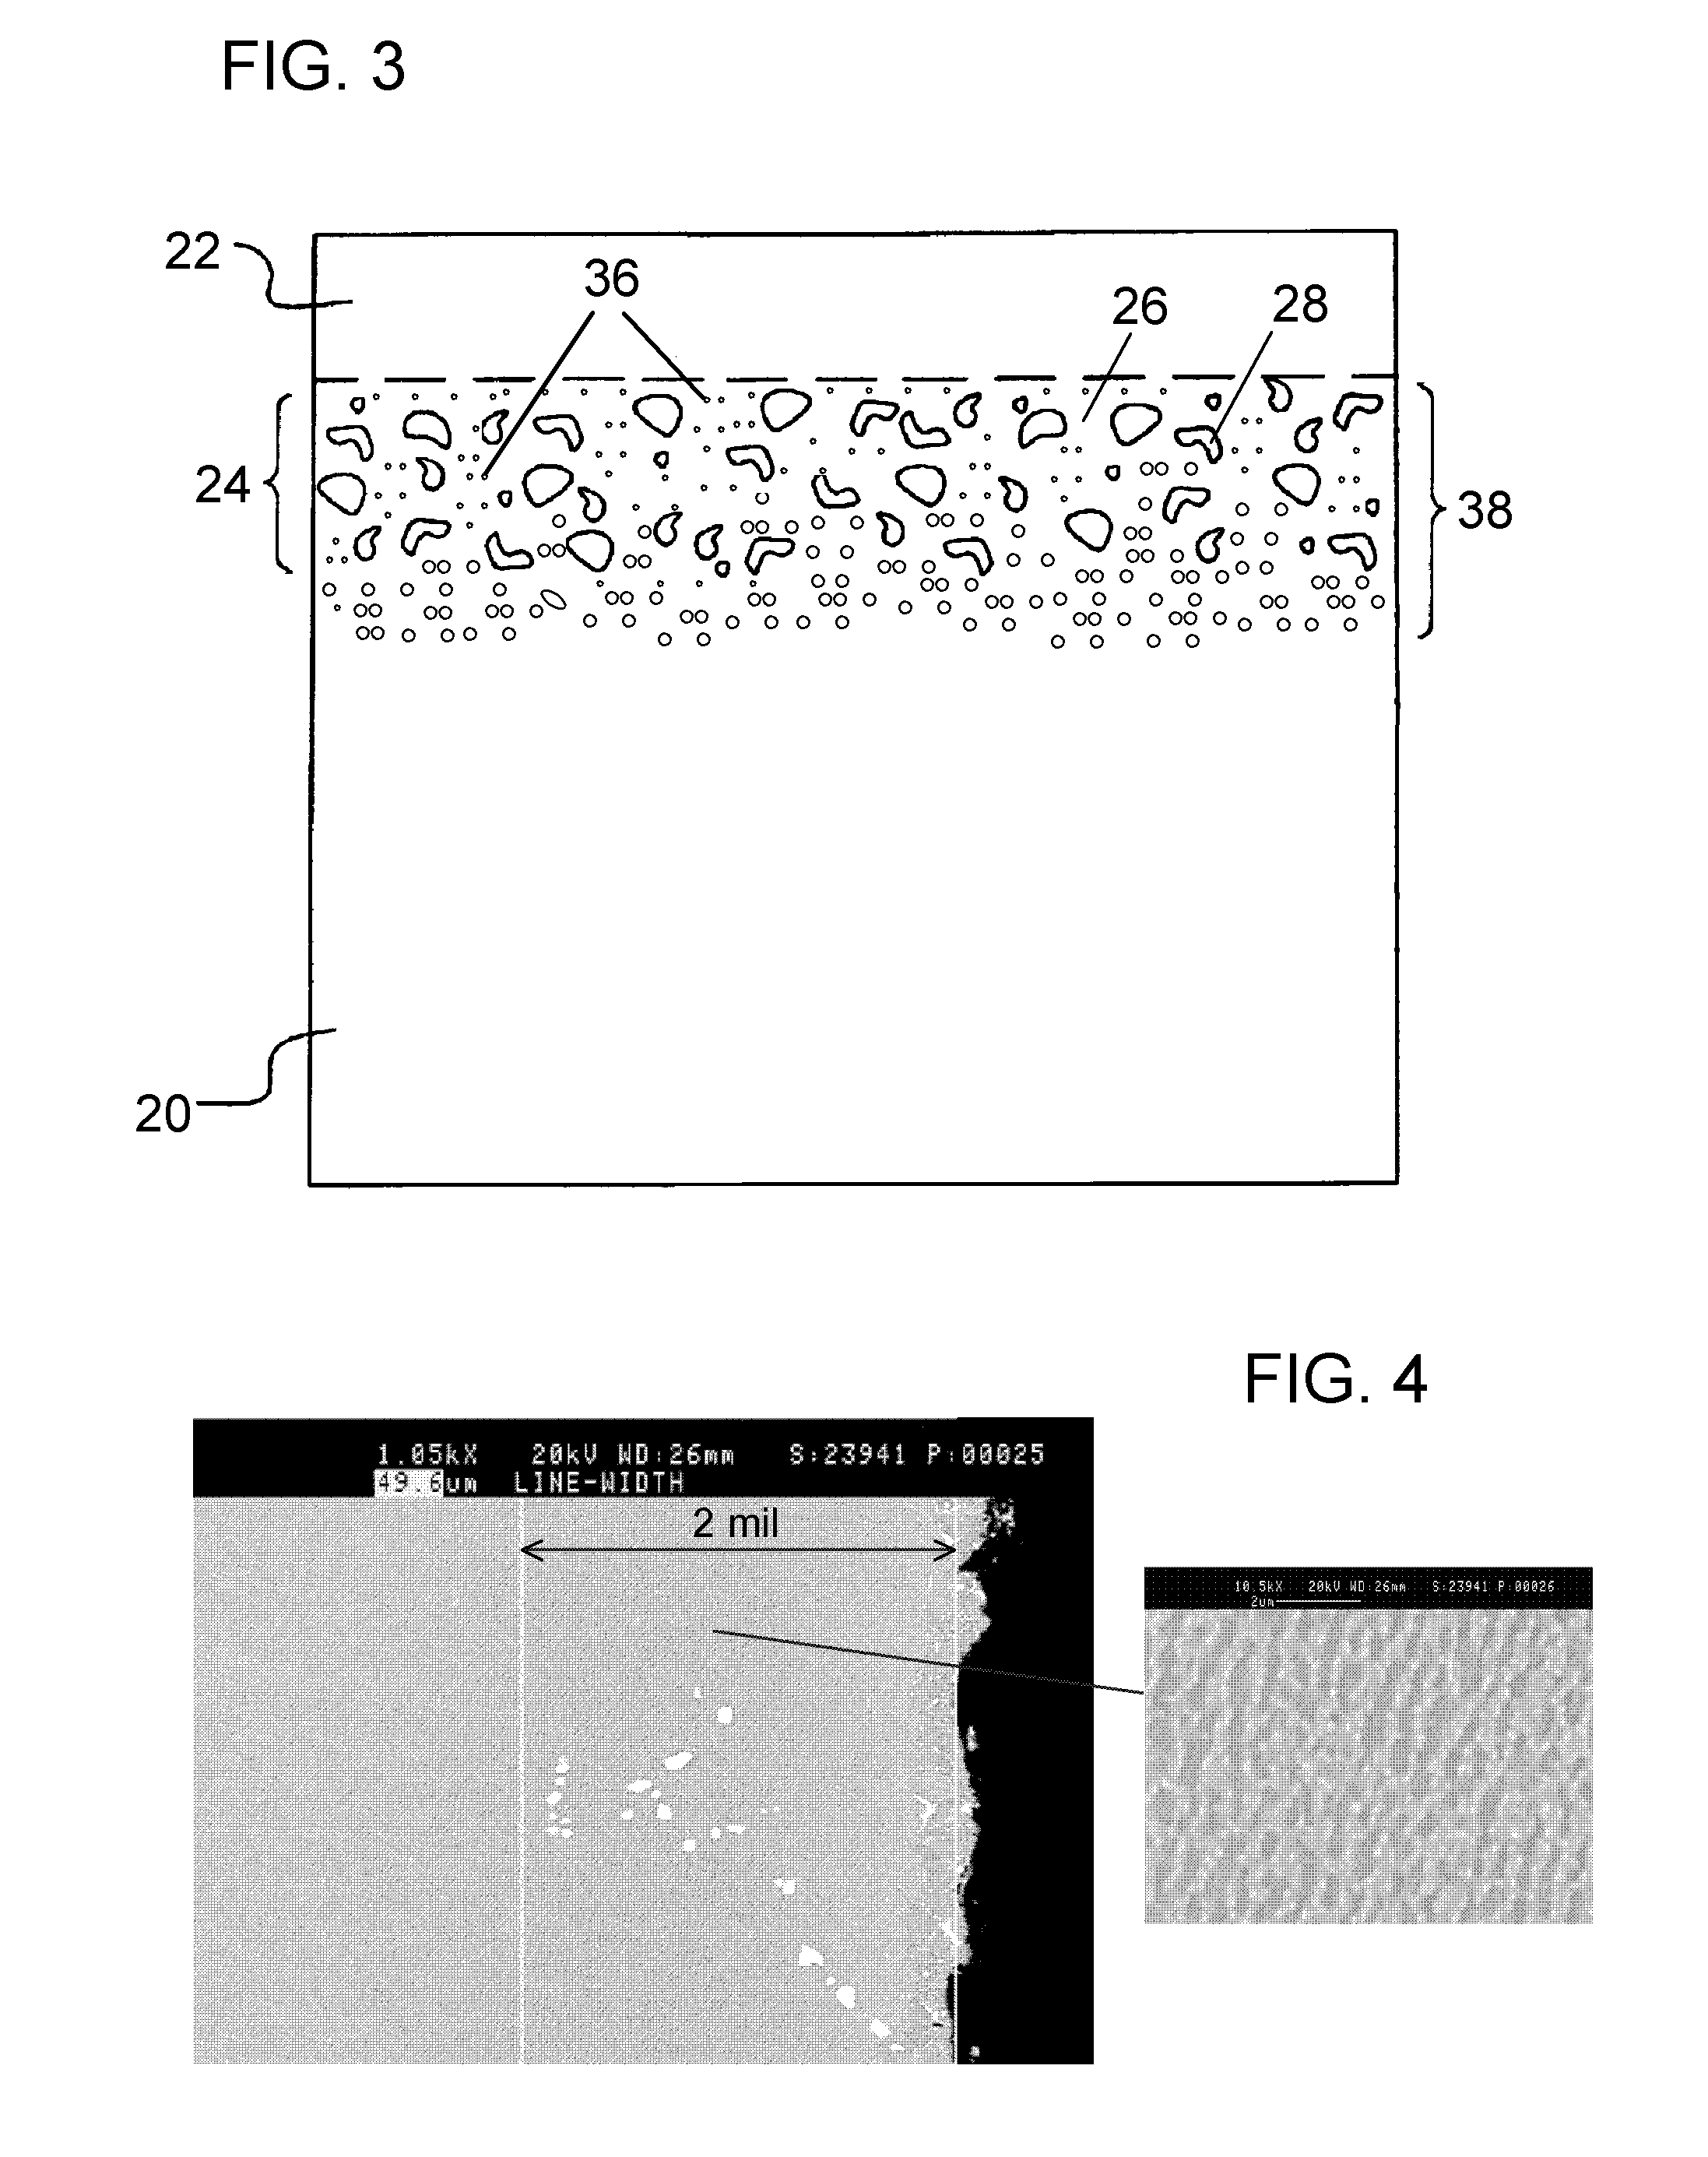 Carburization process for stabilizing nickel-based superalloys